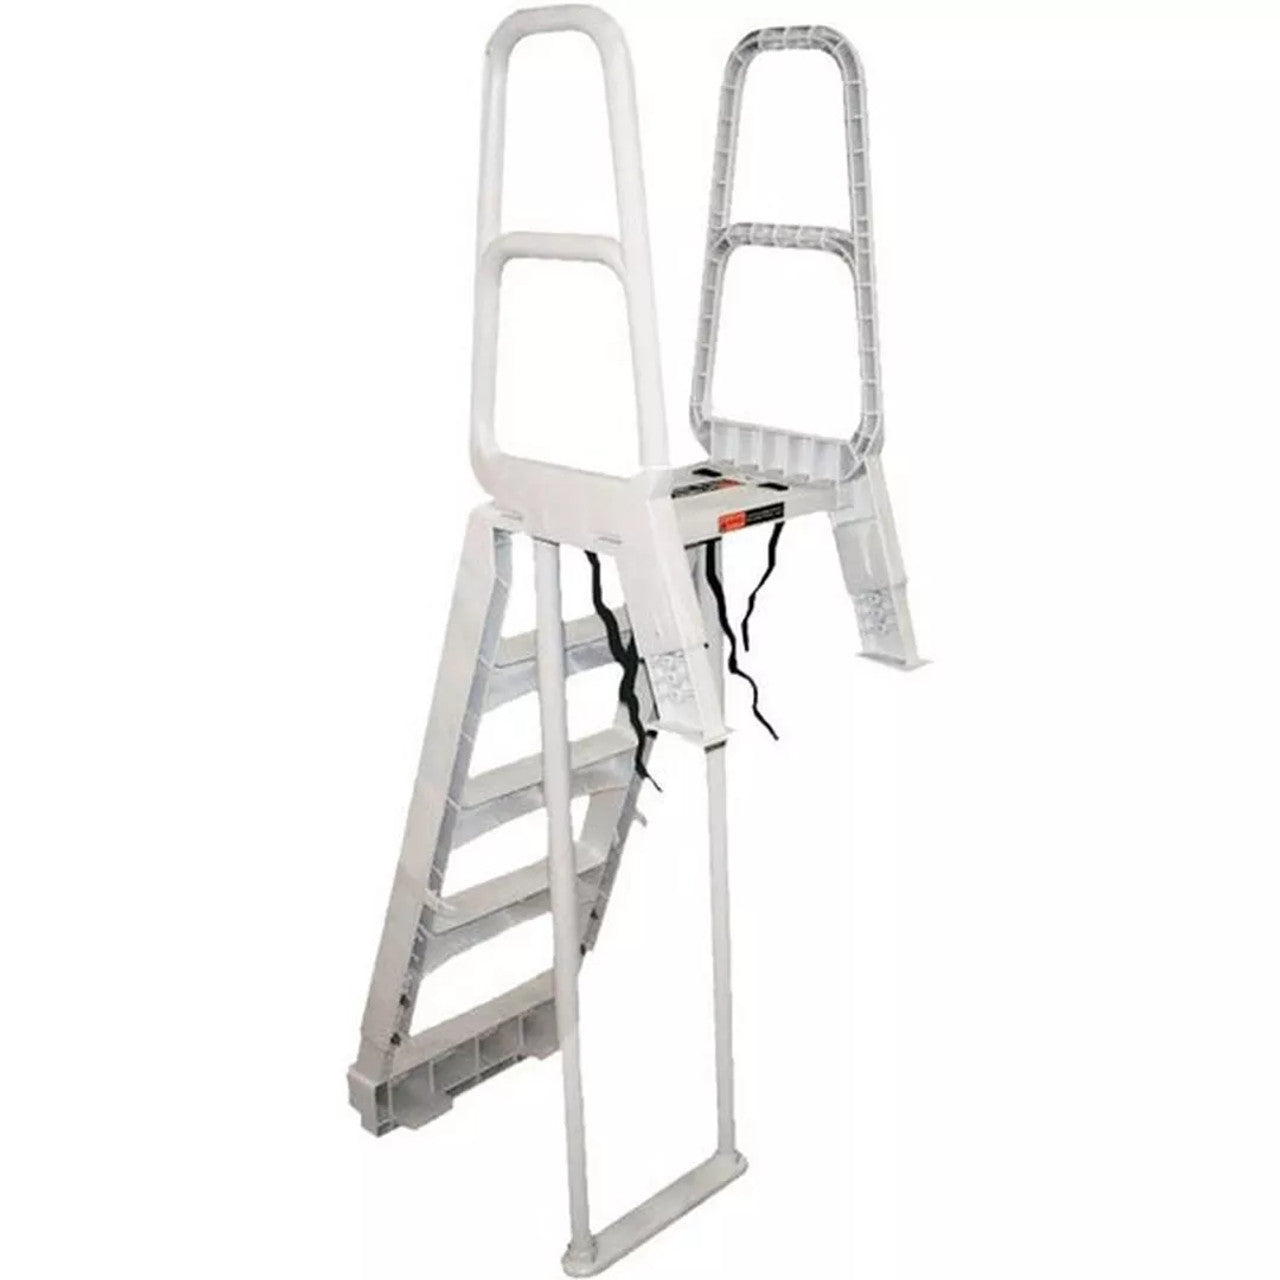 Exterior Ladder for I-step or EZ Entry System by Main Access